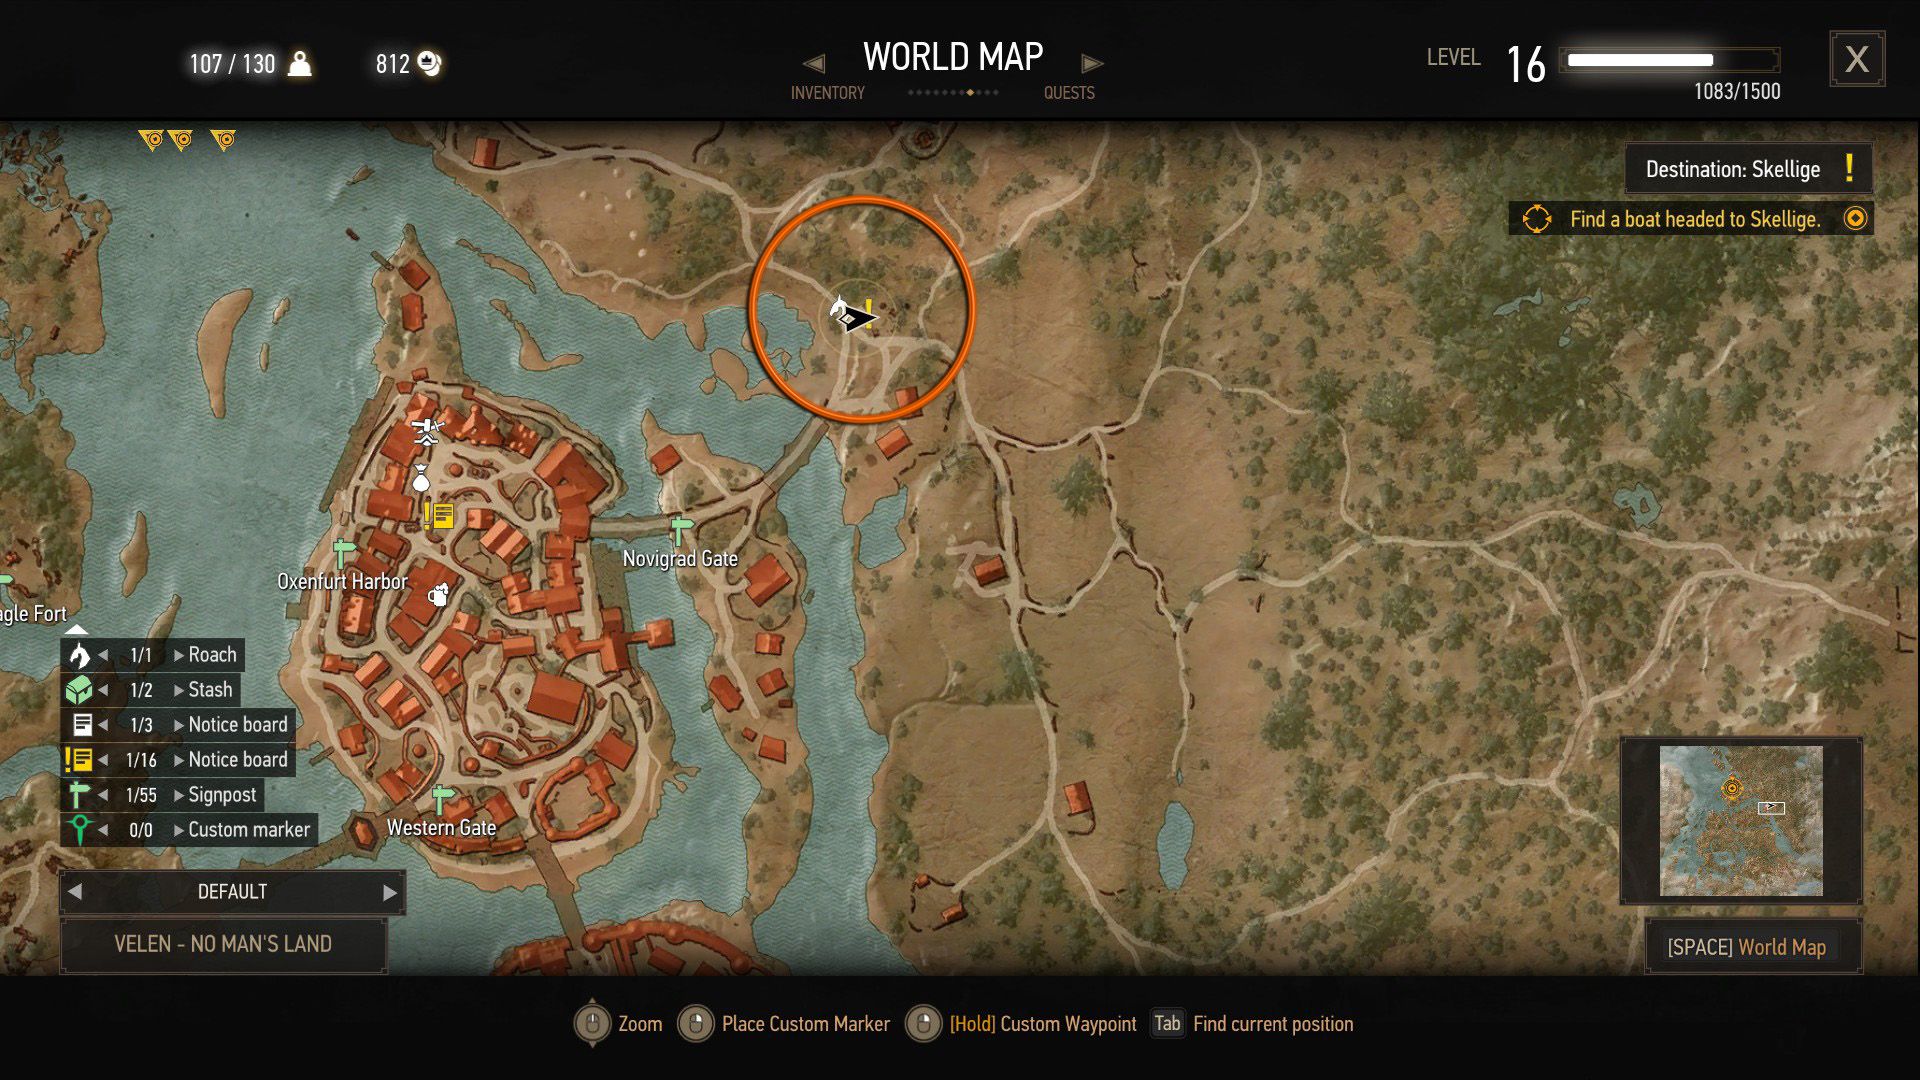 An annotated screenshot of a map in The Witcher 3, showing where the quest can start.